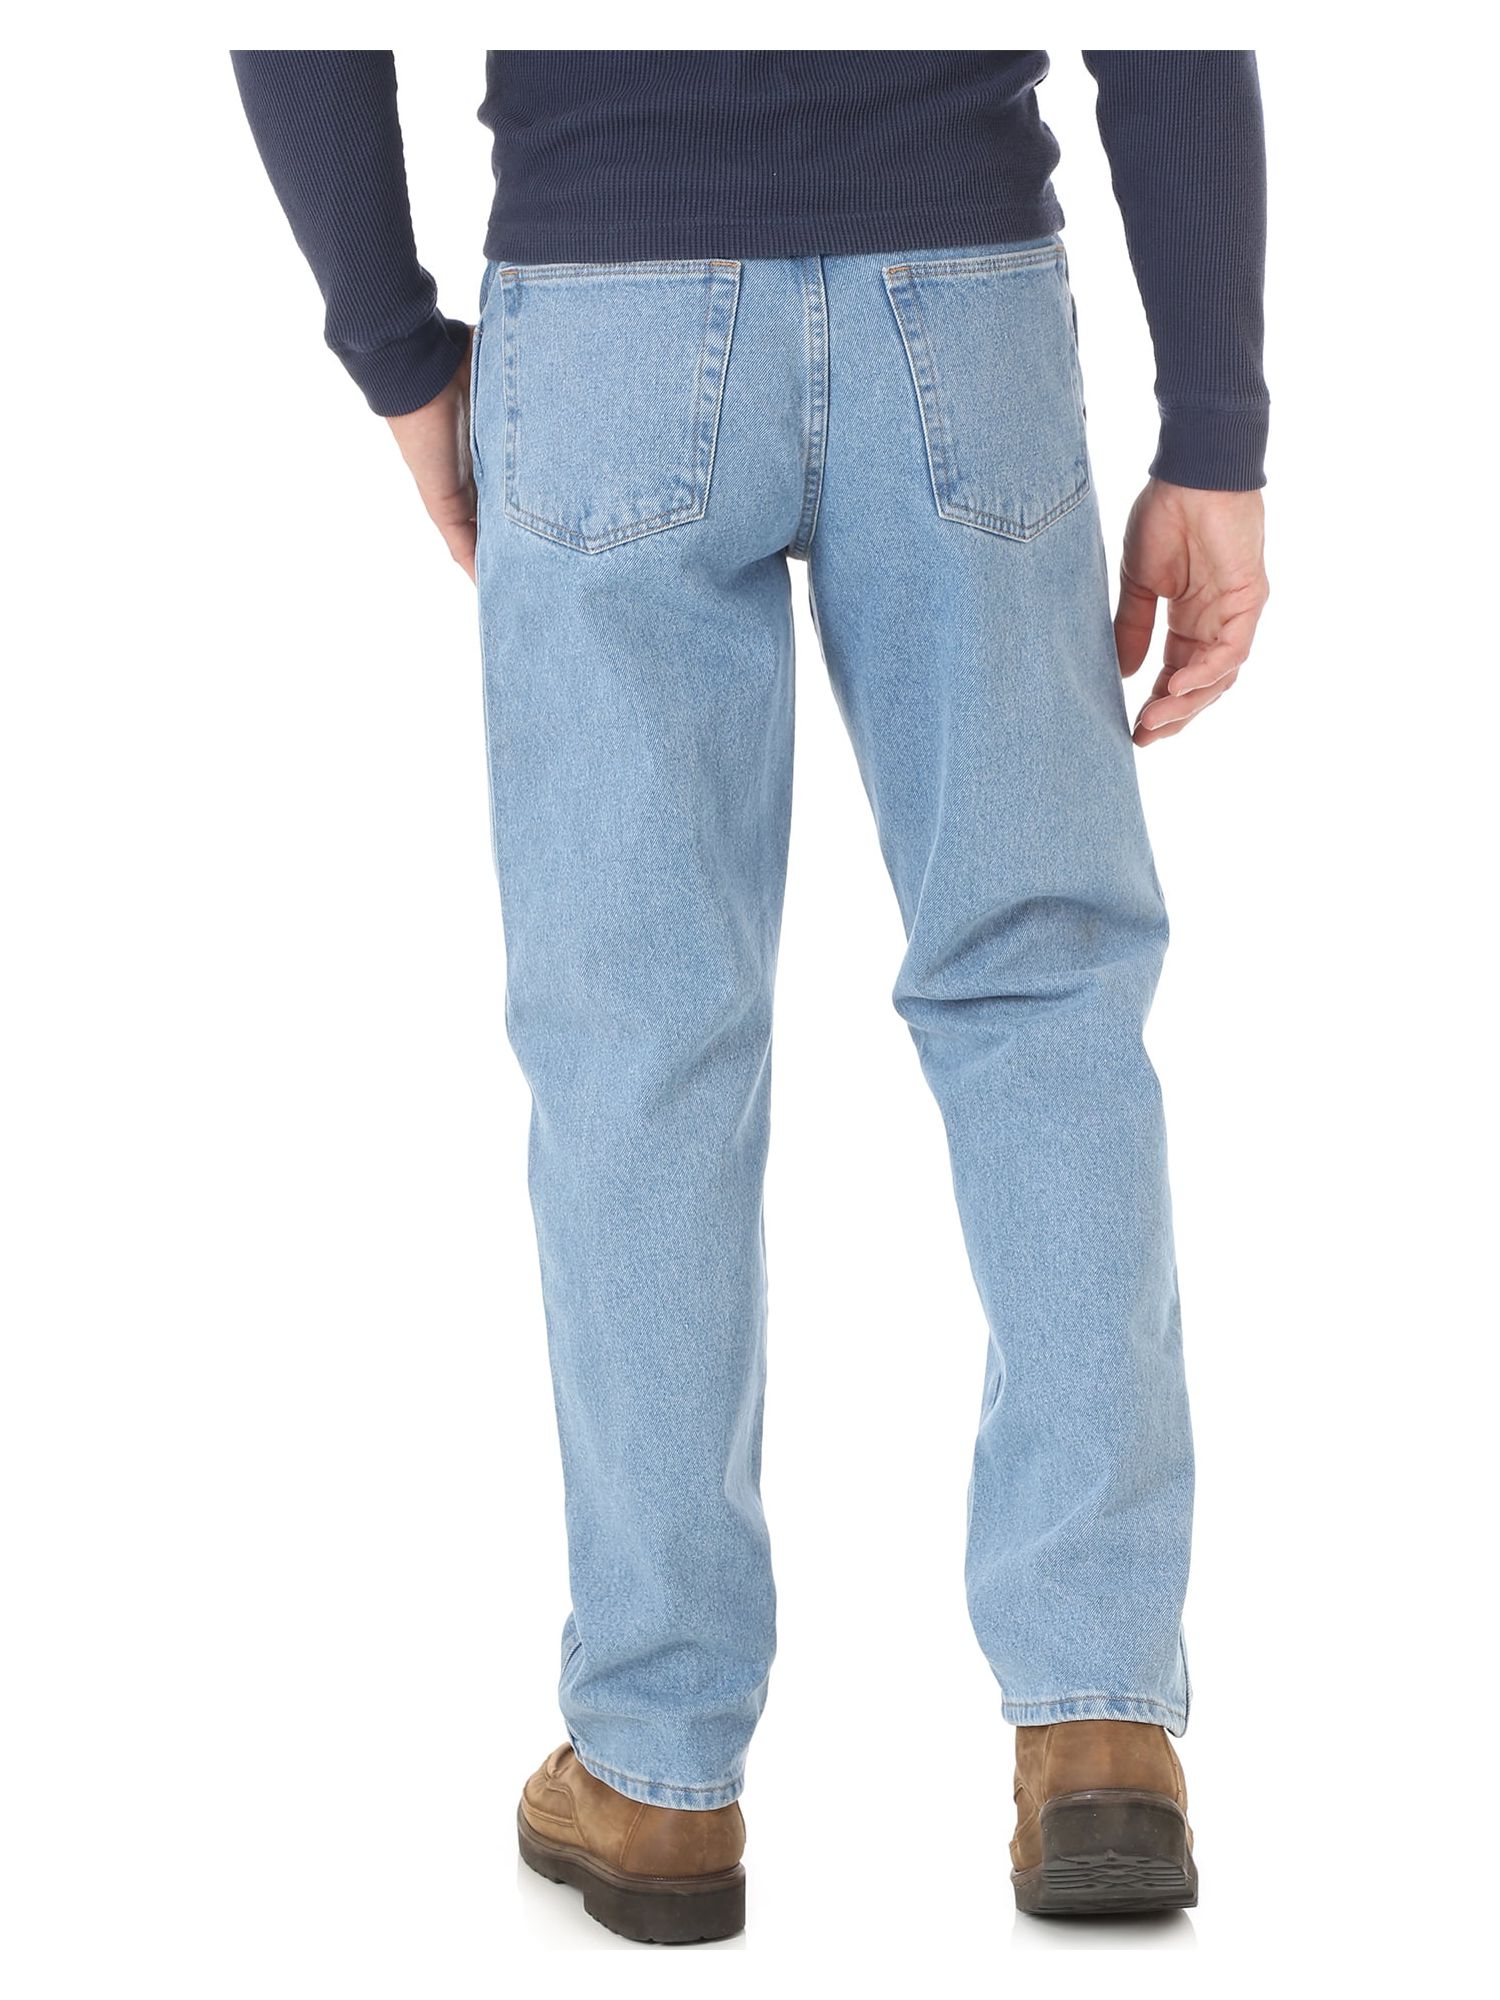 Wrangler Rustler Men's and Big Men's Relaxed Fit Jeans - image 3 of 4